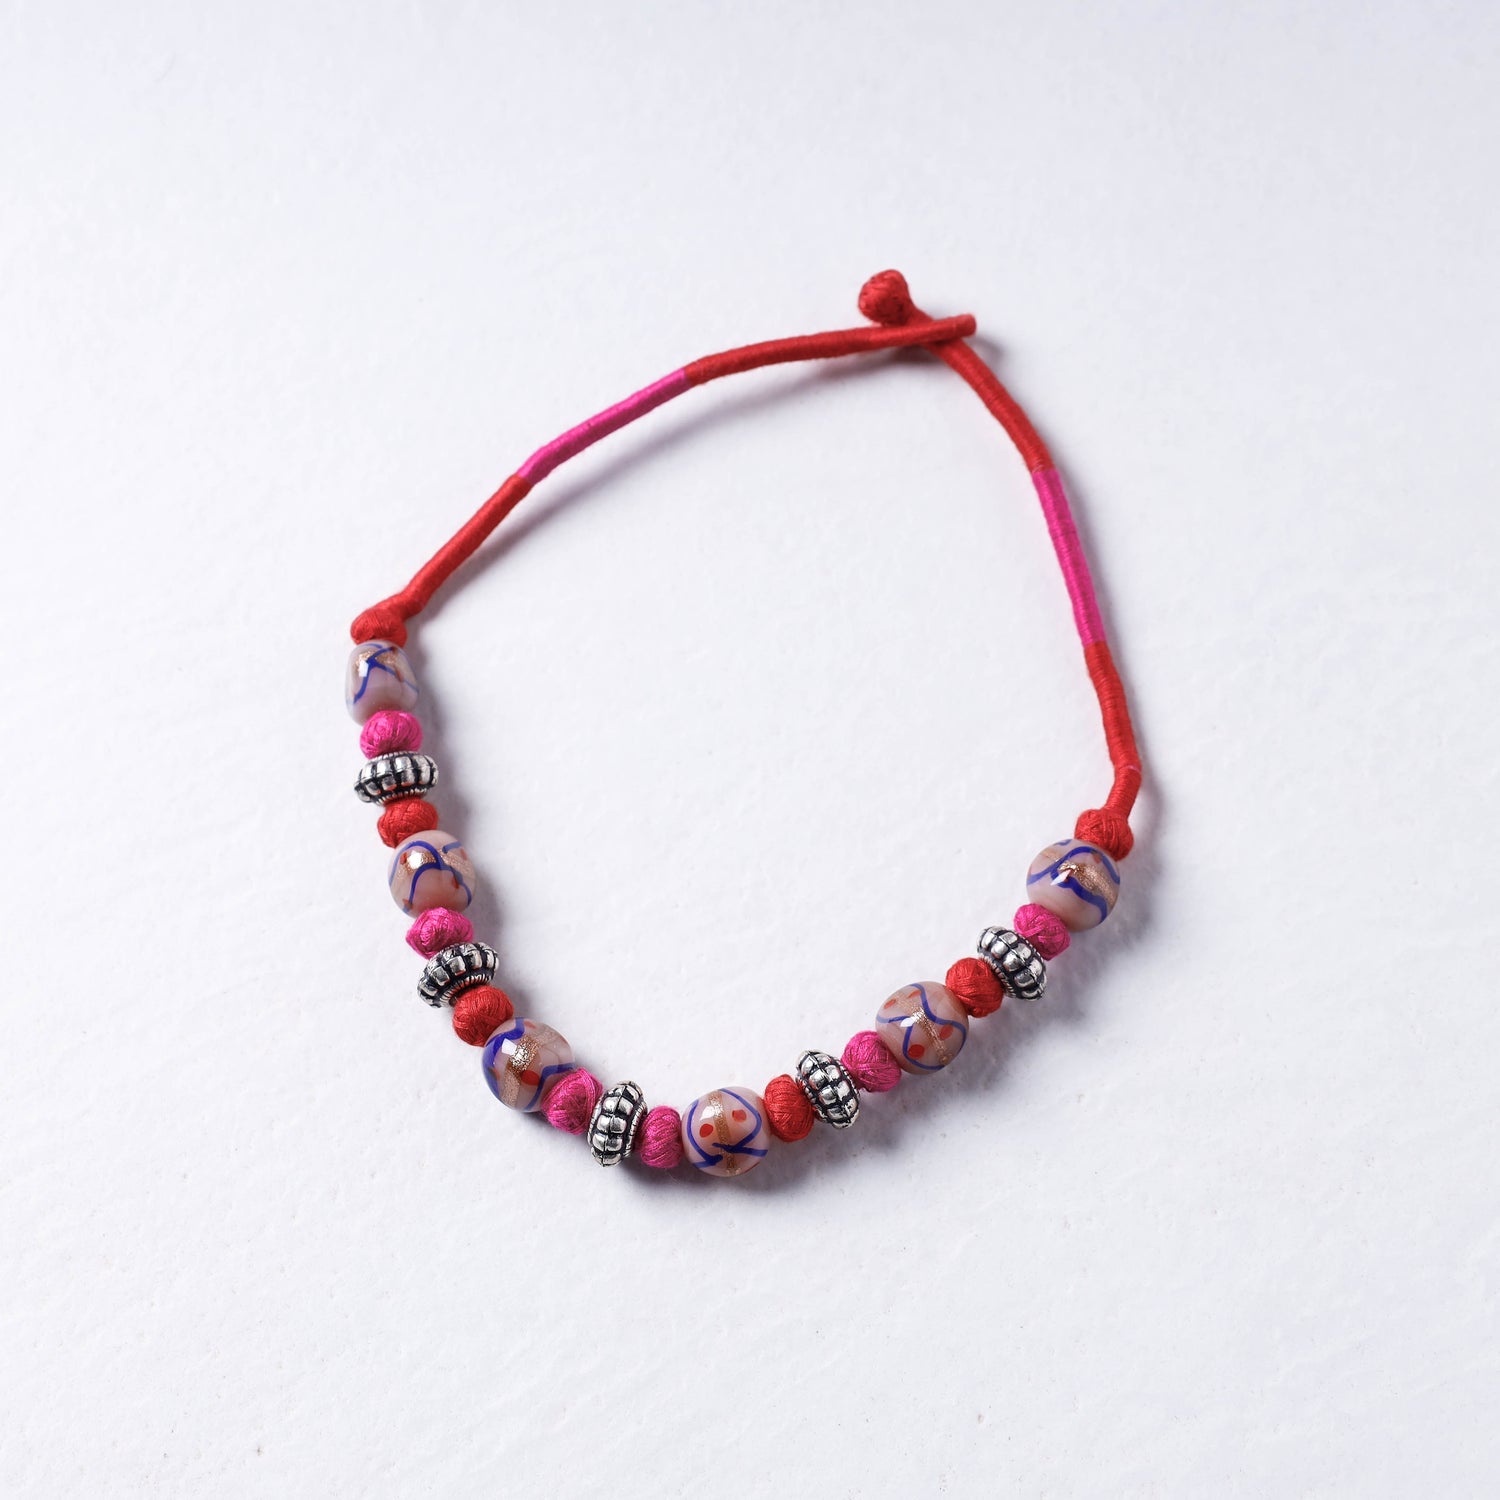 Patwa Thread & Bead Work Necklace by Kailash Patwa